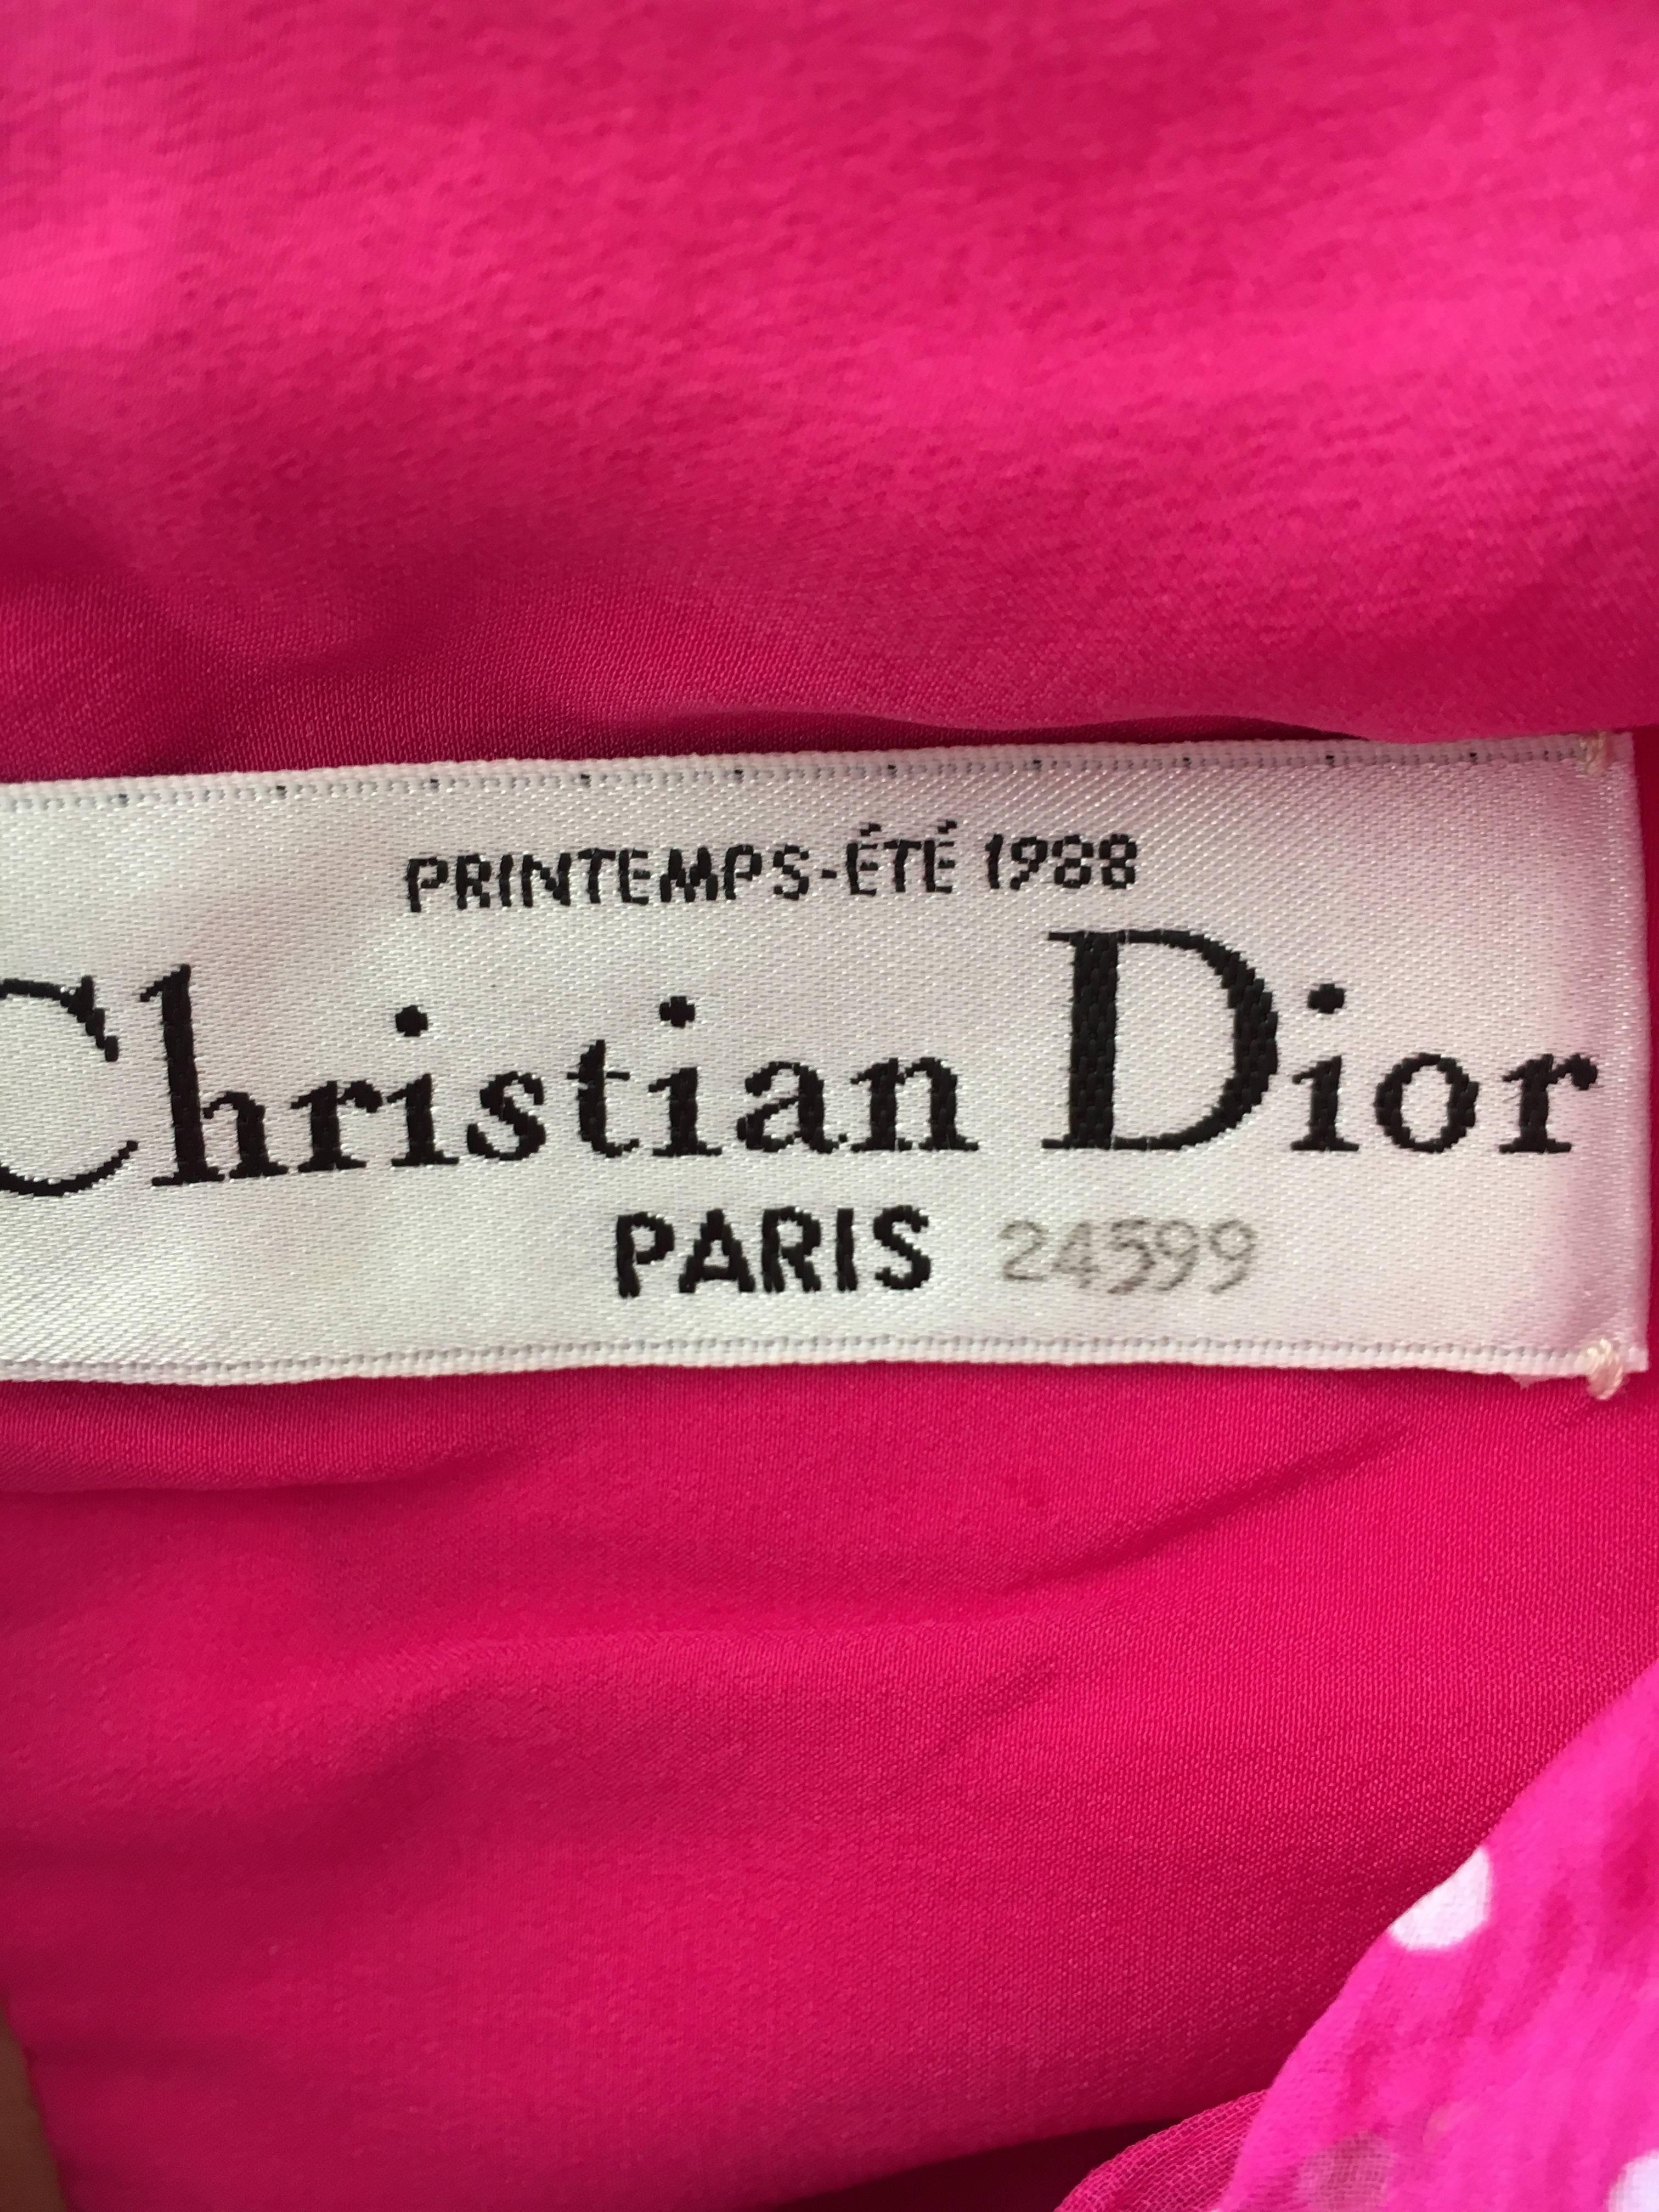 Christian Dior Numbered Haute Couture Silk Chiffon Day Dress Spring 1988 For Sale 2